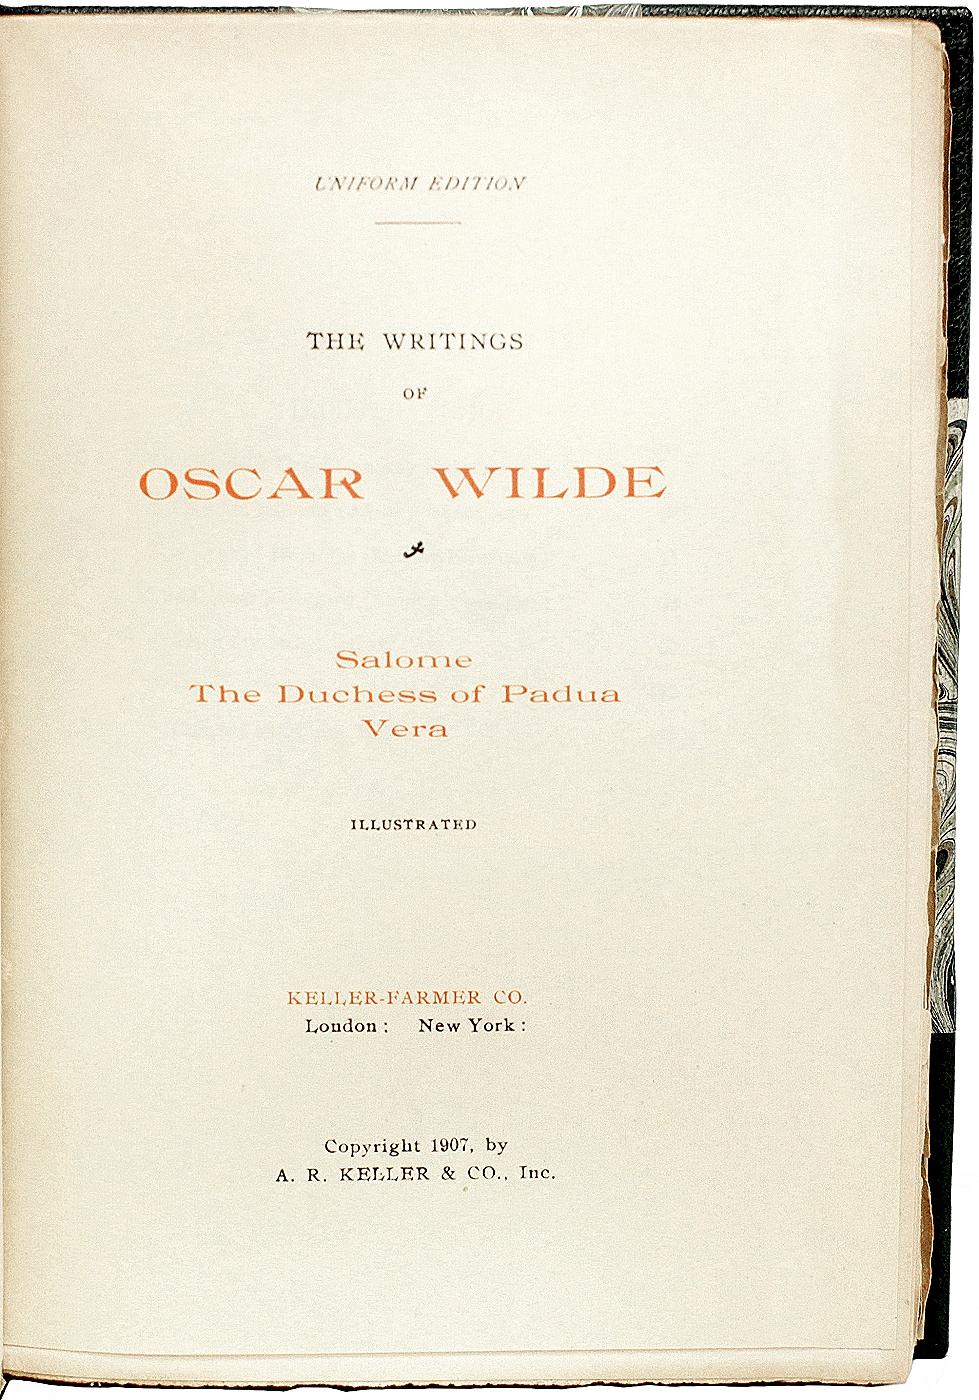 Early 20th Century The Complete Works - Writings of Oscar Wilde. EDITION DE LUXE. 15 VOLS. 1907 For Sale